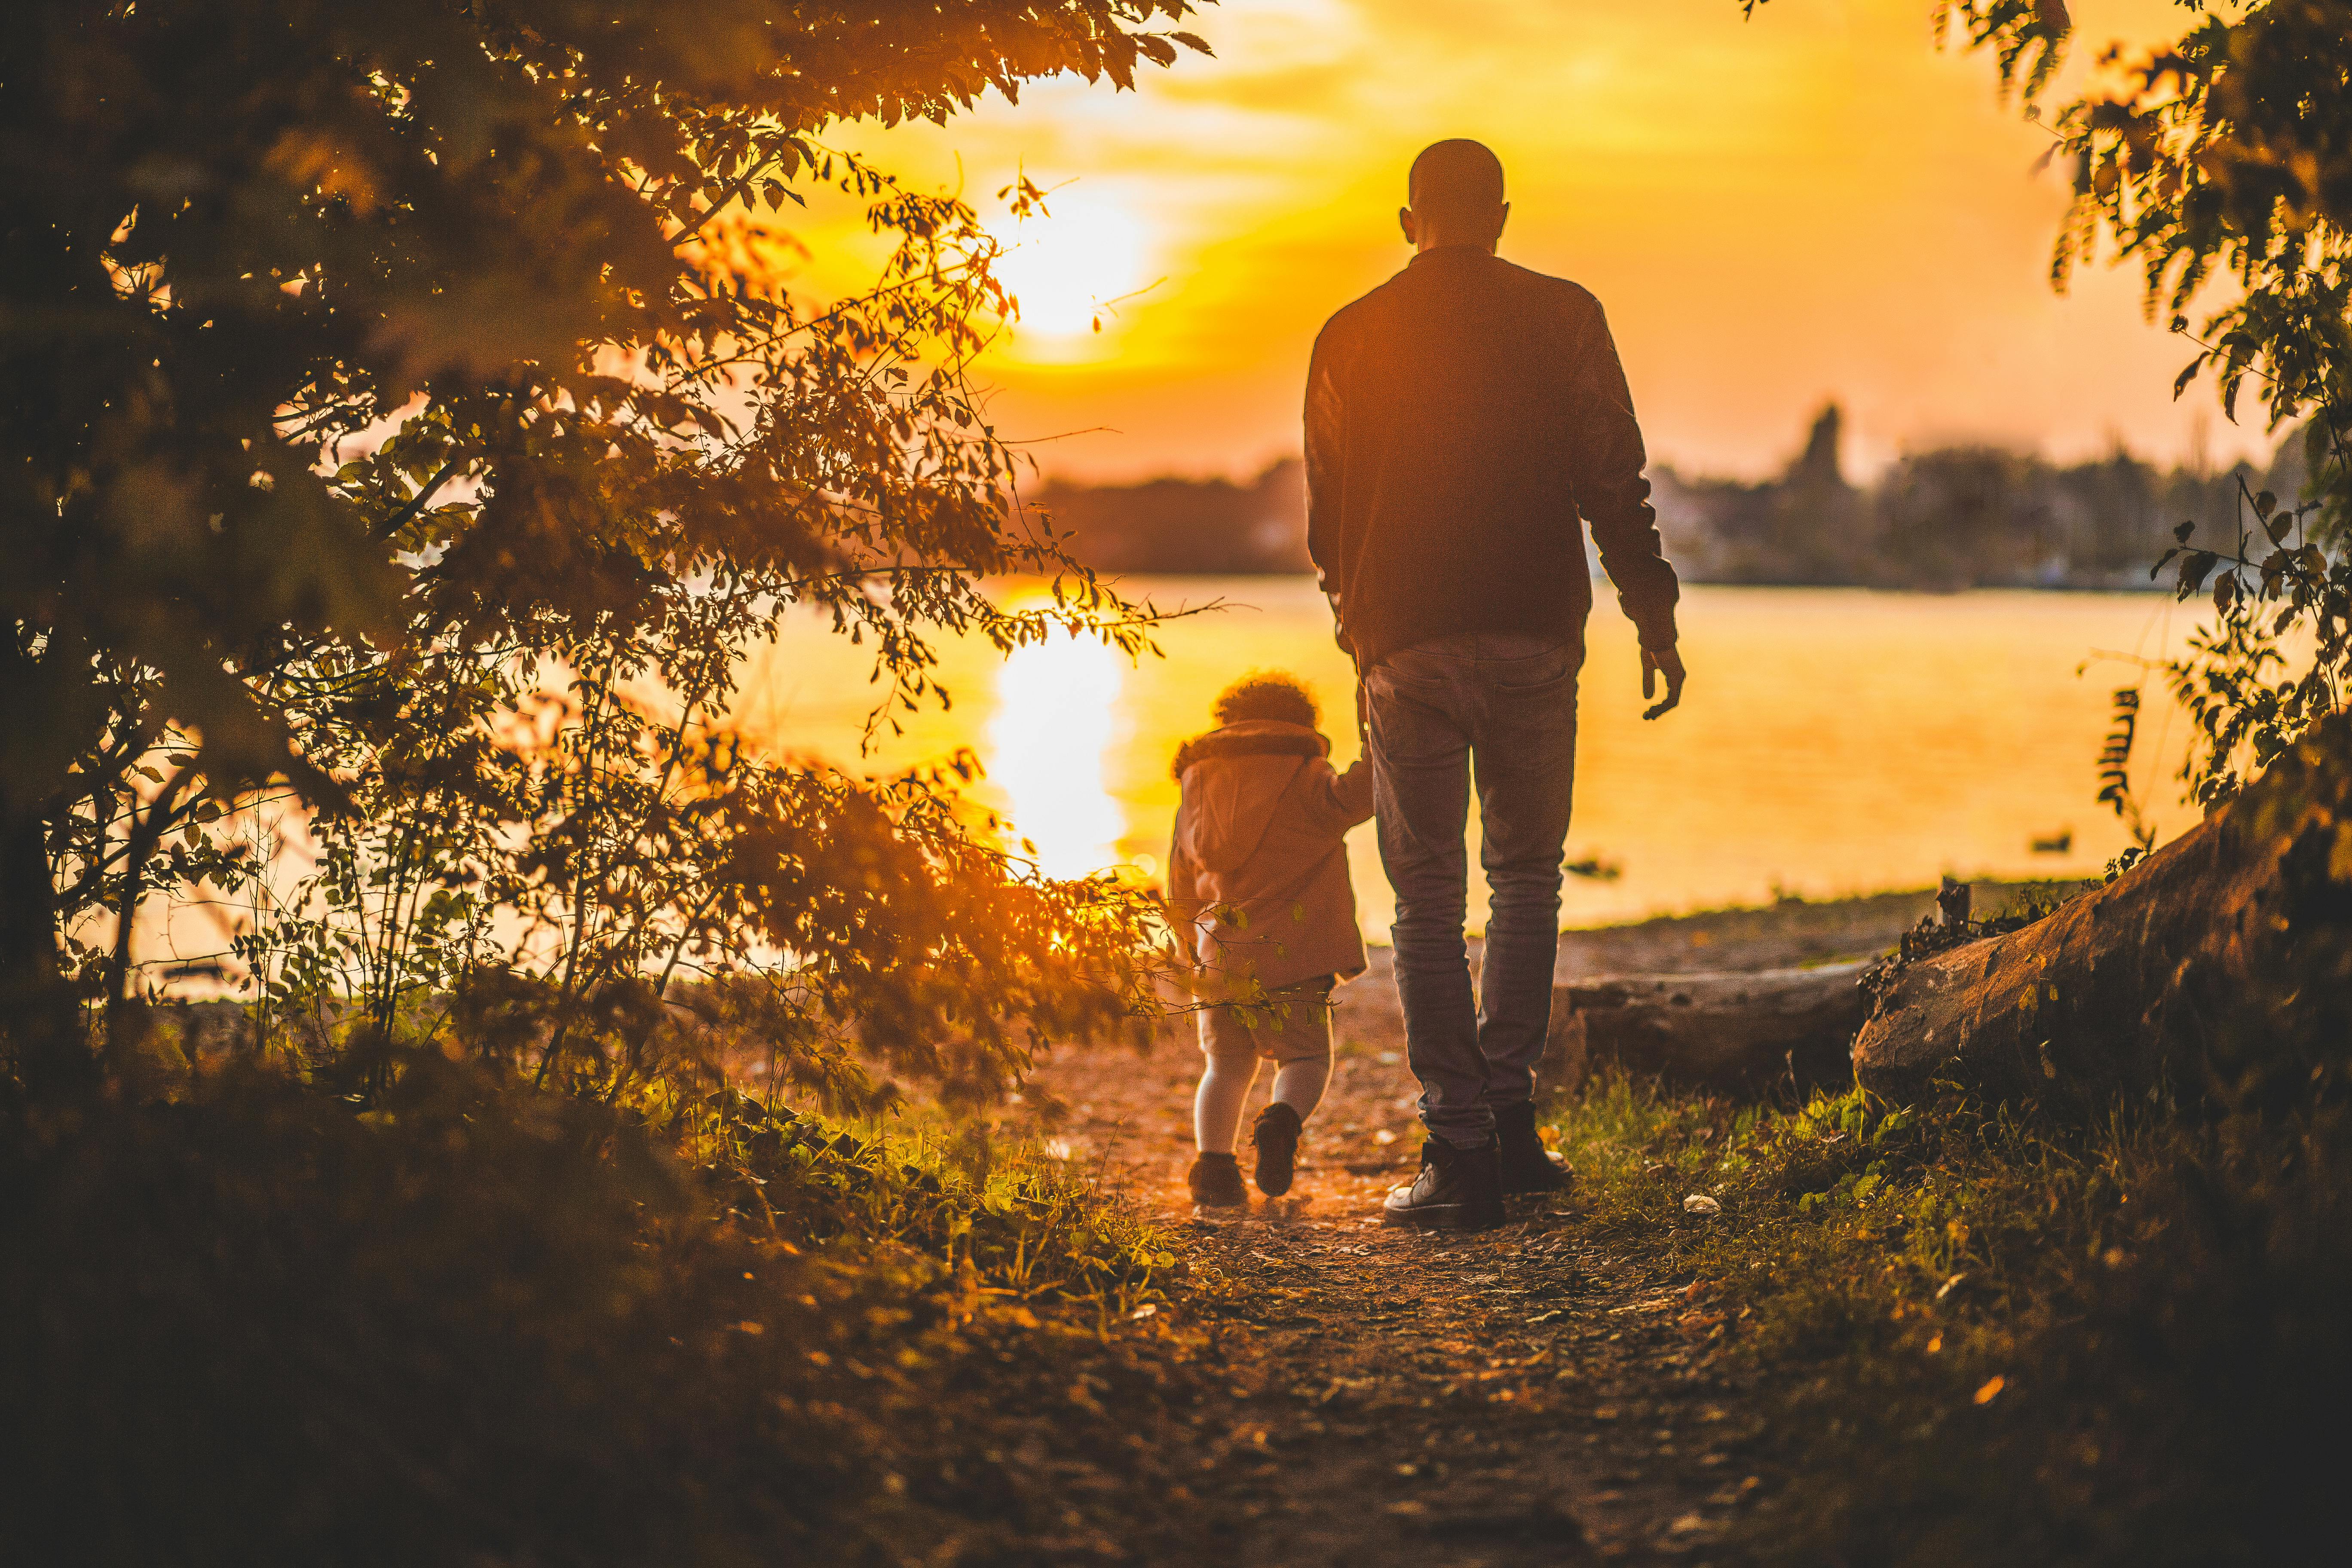 A father holding his son | Source: Pexels